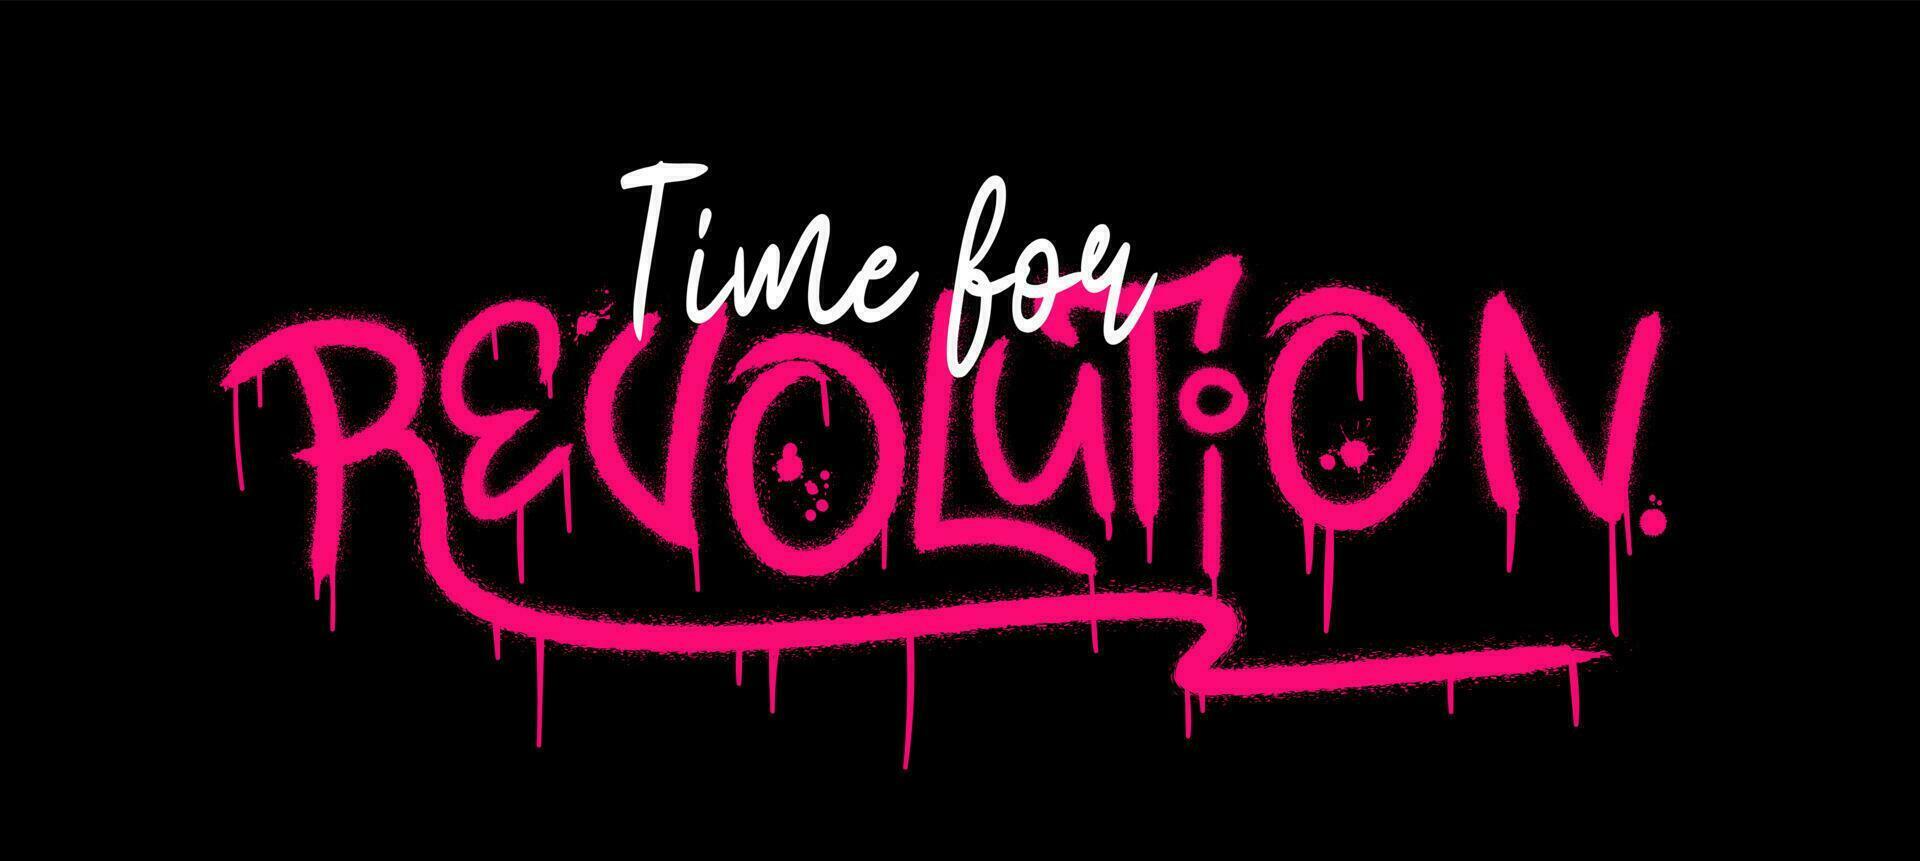 Time for revolution. Urban street graffiti style with splash effects and drops in neon pink colour on black background. vector